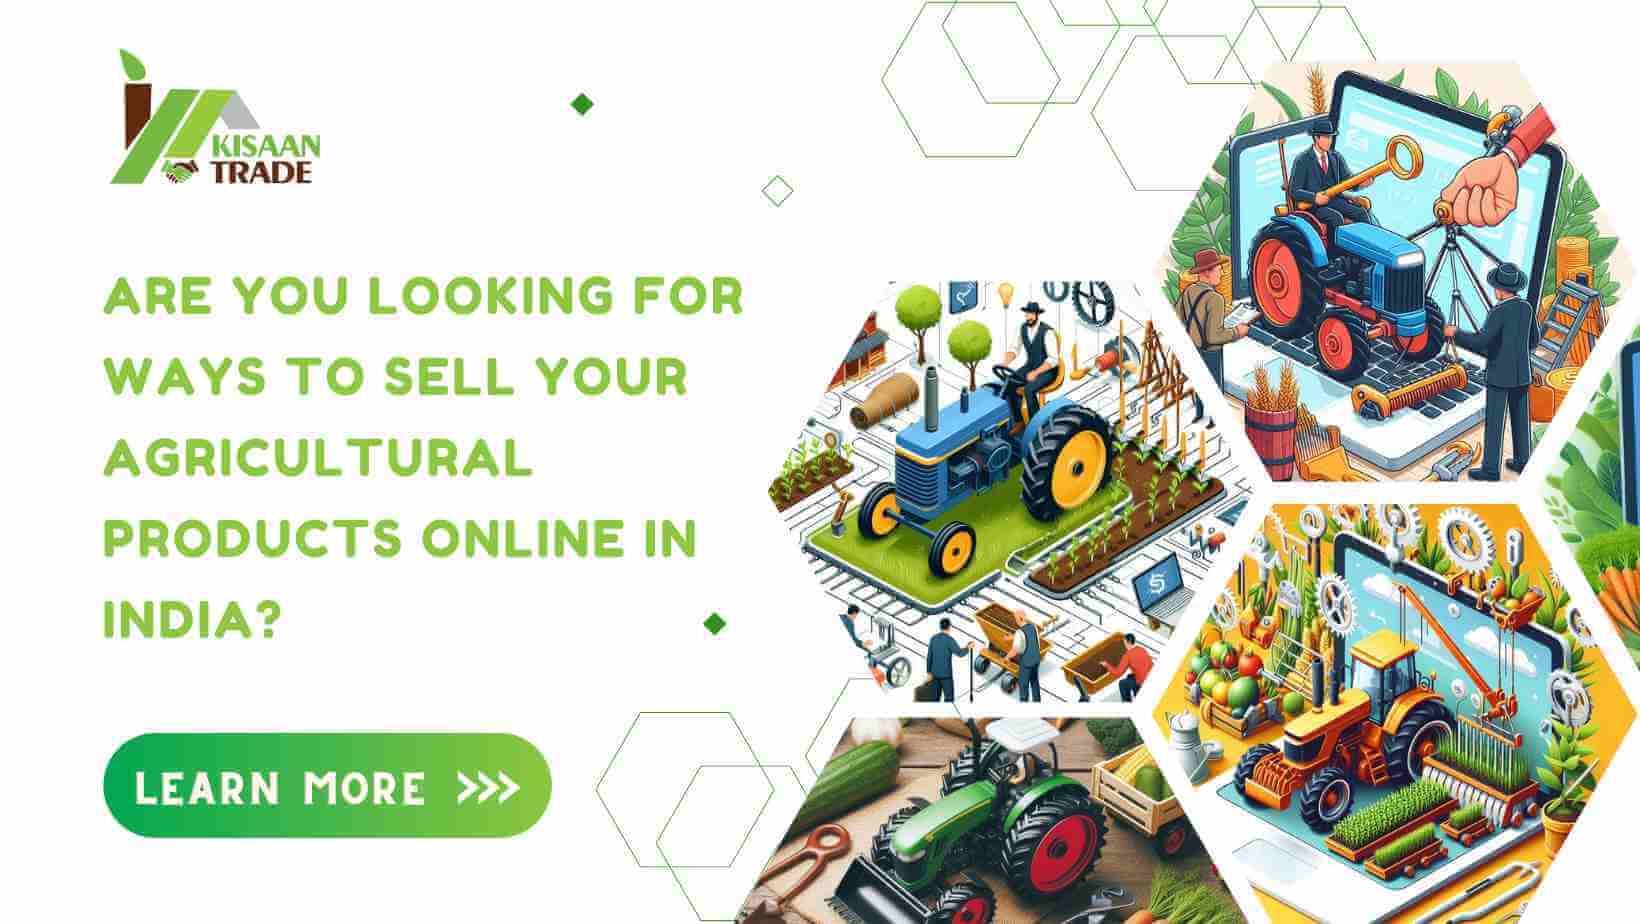 How can I sell my agricultural products online in India?